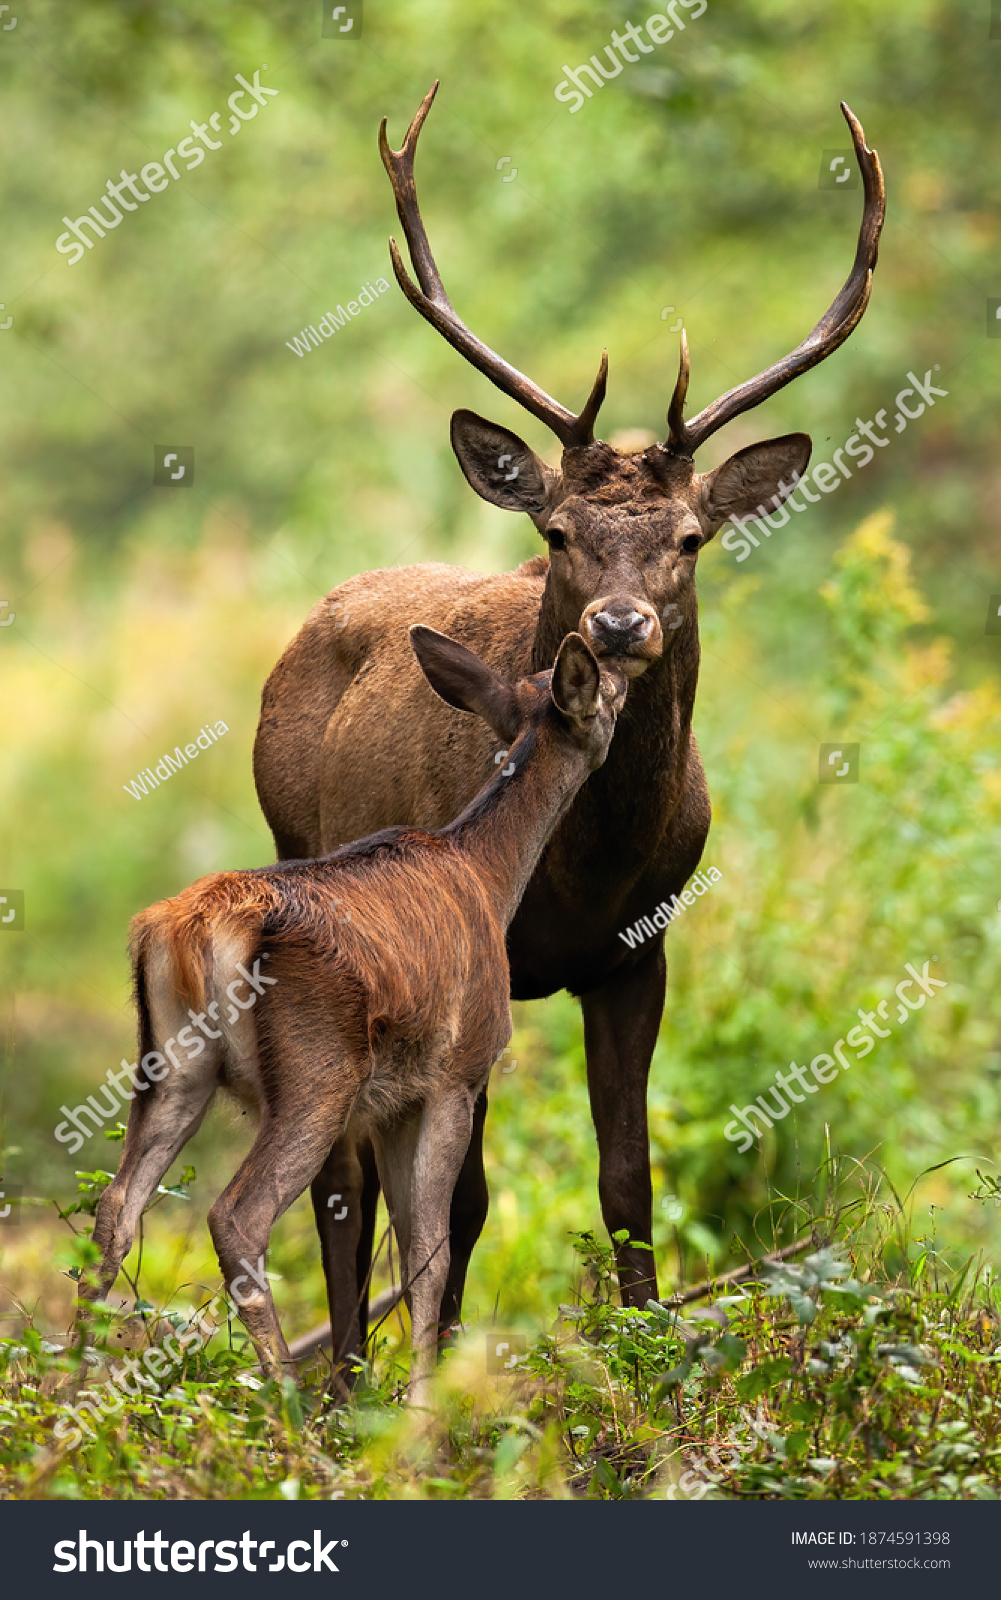 Two red deer, cervus elaphus, smelling in forest in summertime nature. Antlered stag and hind kissing in woodland. Wild mammals couple standing in green environment. #1874591398